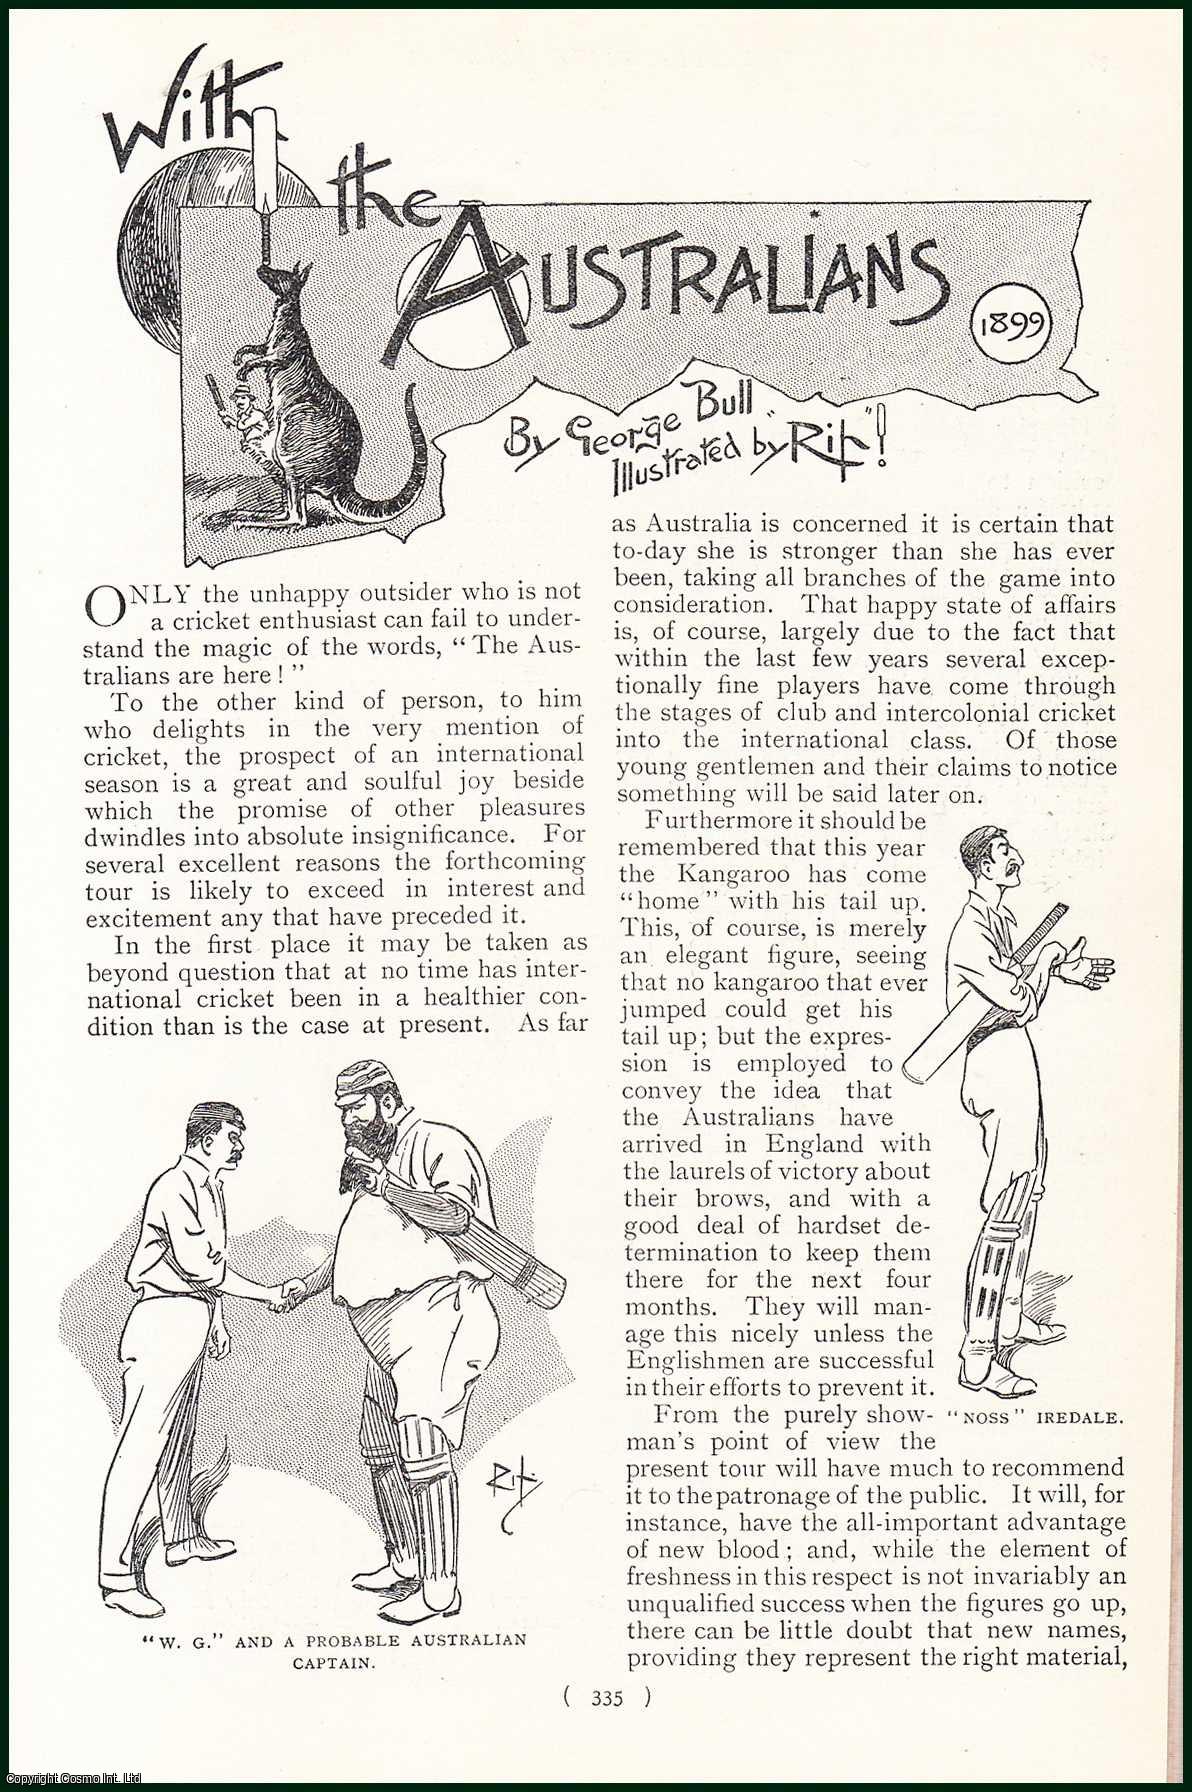 George Bull - Cricket With The Australians. An uncommon original article from the Harmsworth London Magazine, 1899.